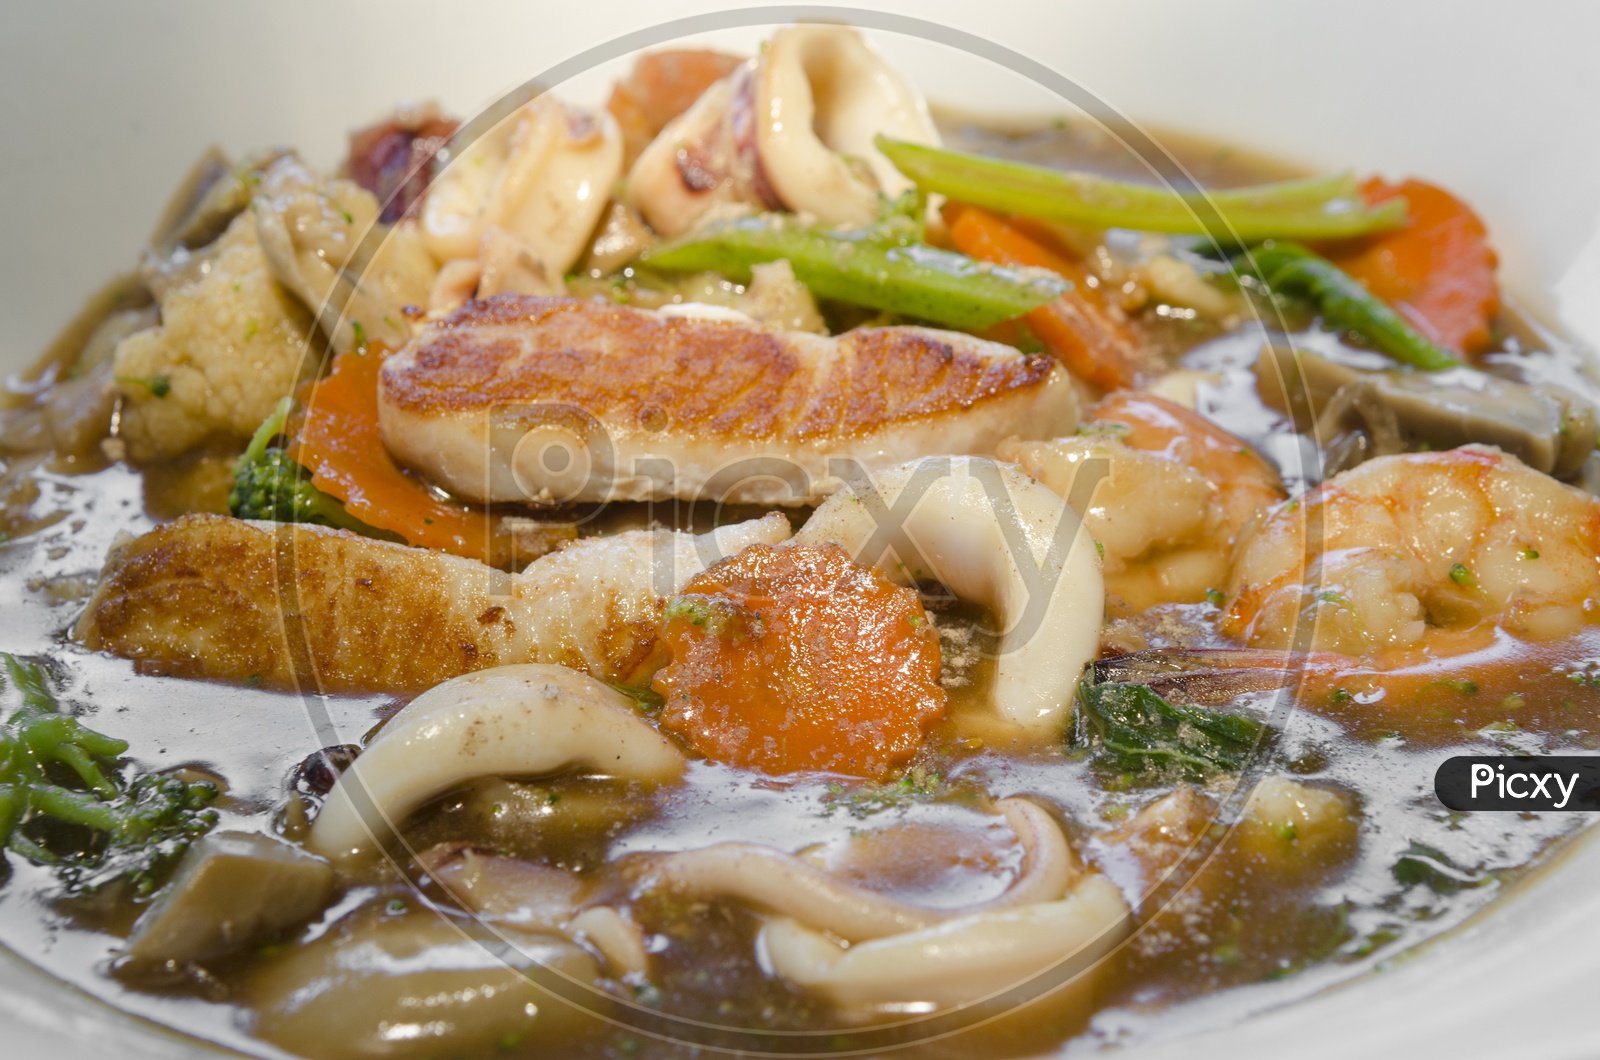 Thai Seafood dinner made with shrimp, mussel, salmon,